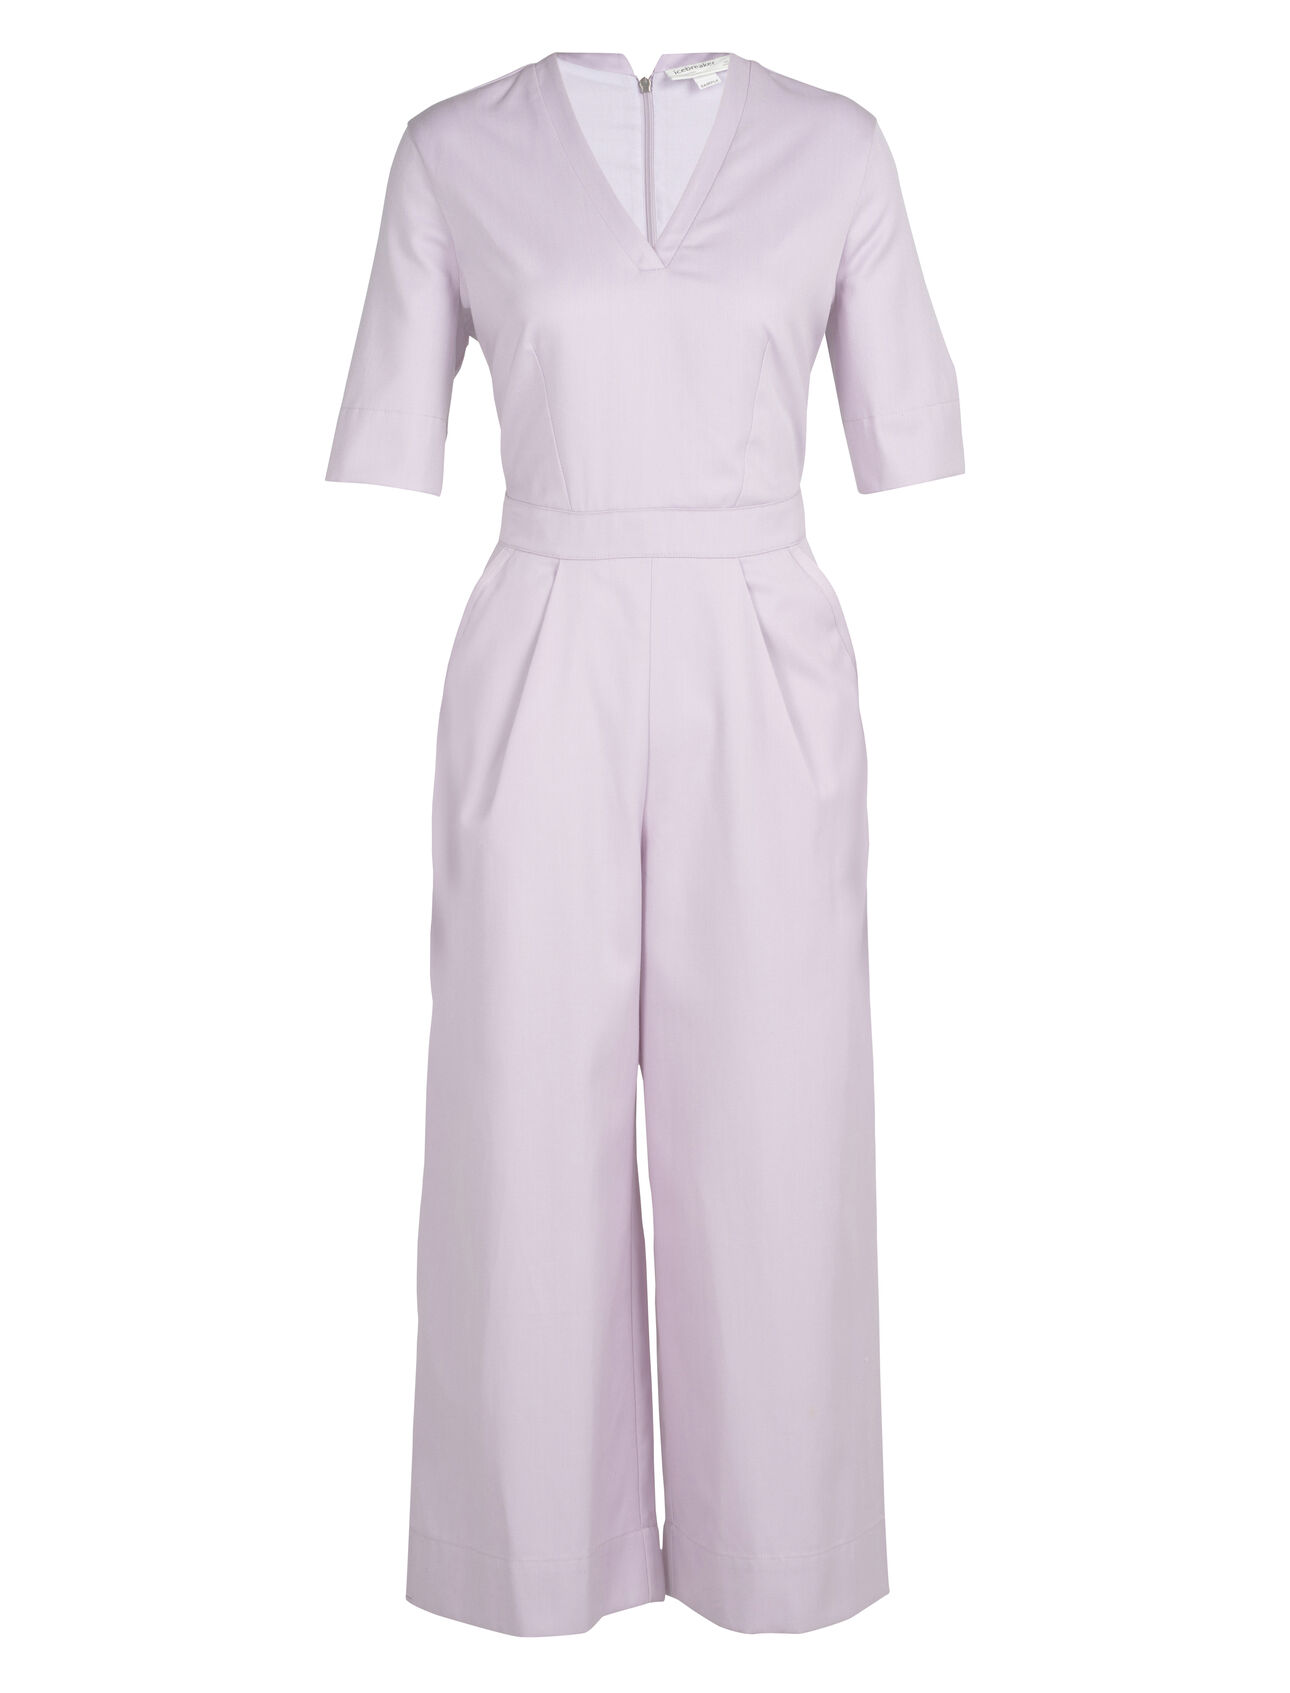 Womens Merino Natural Blend Jumpsuit A modern take on the classic jumpsuit, the Merino Natural Blend Short Sleeve Jumpsuit features a woven blend of merino wool and organic cotton, lined with Cool-Lite™ for breathable comfort and style.